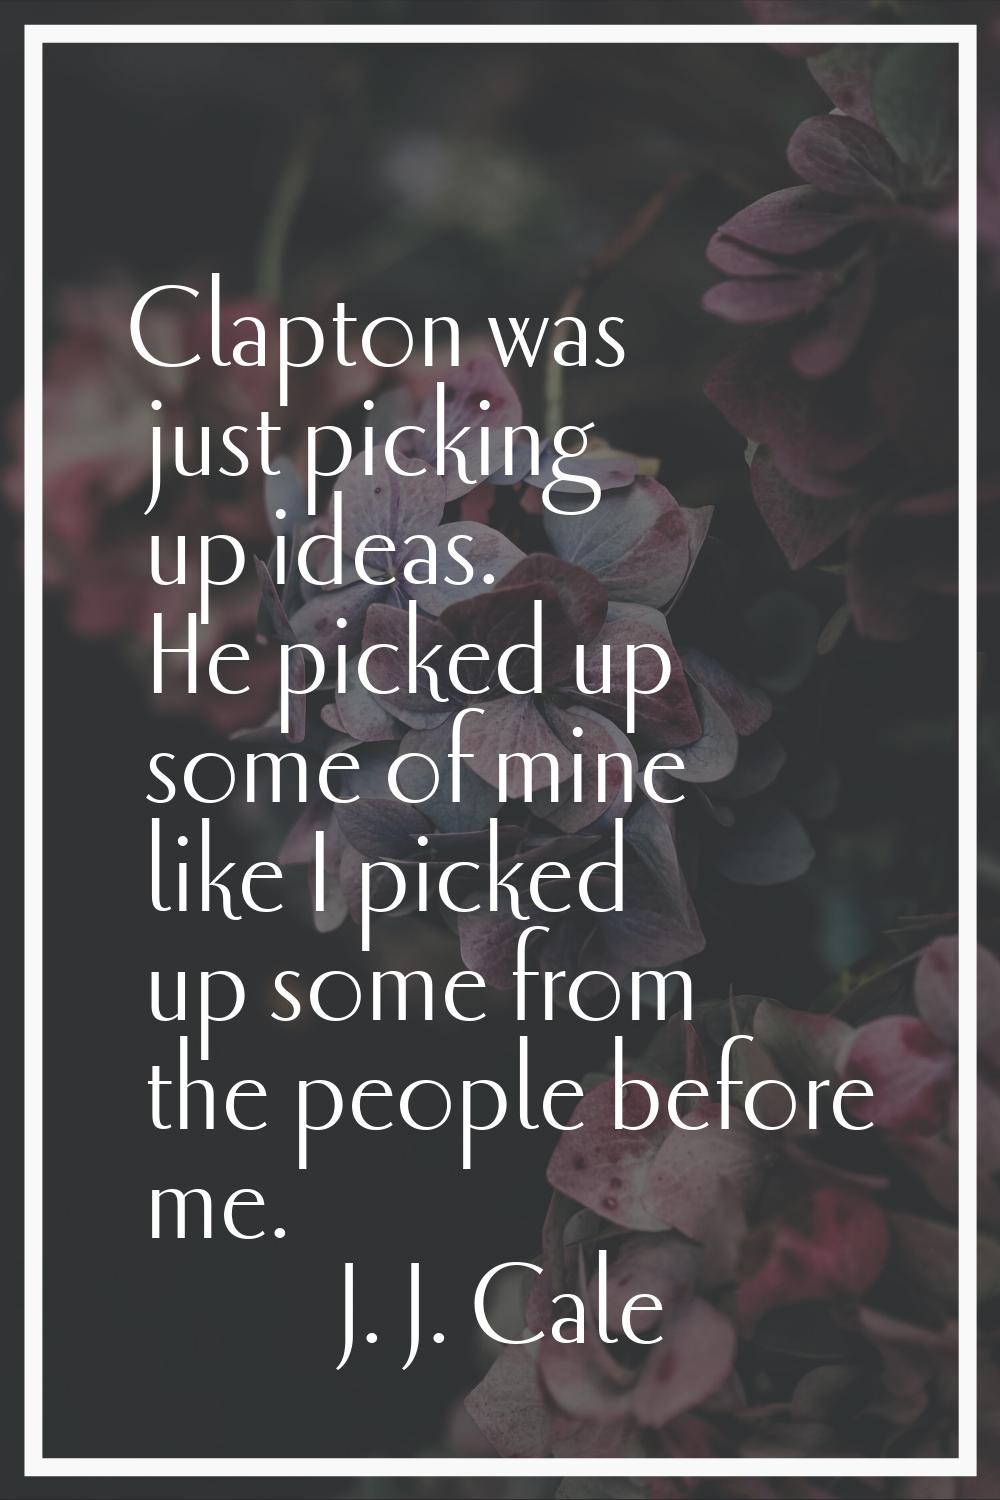 Clapton was just picking up ideas. He picked up some of mine like I picked up some from the people 